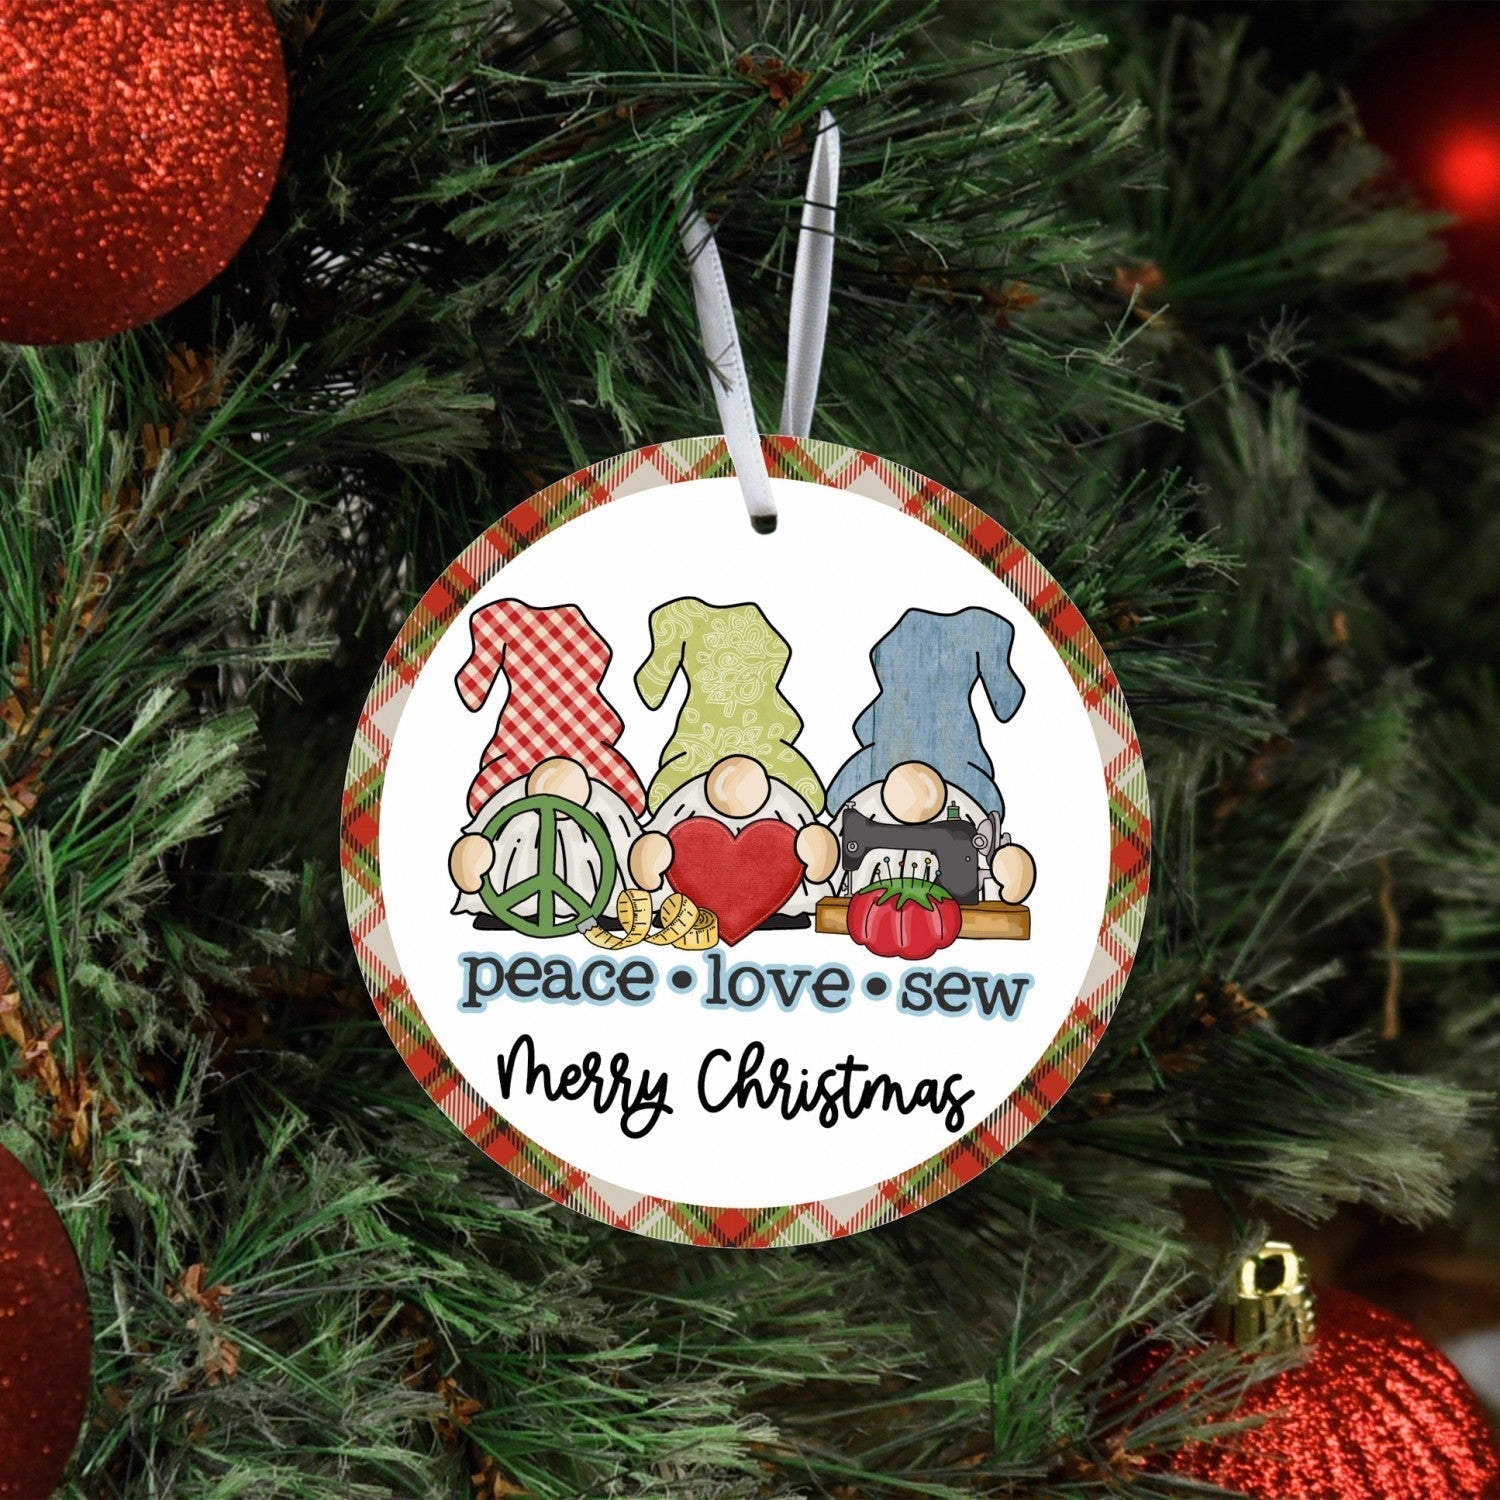 Lake & Laser Christmas Ornament TREE WITH GNOMES, Christmas Ornament by Lake & Laser